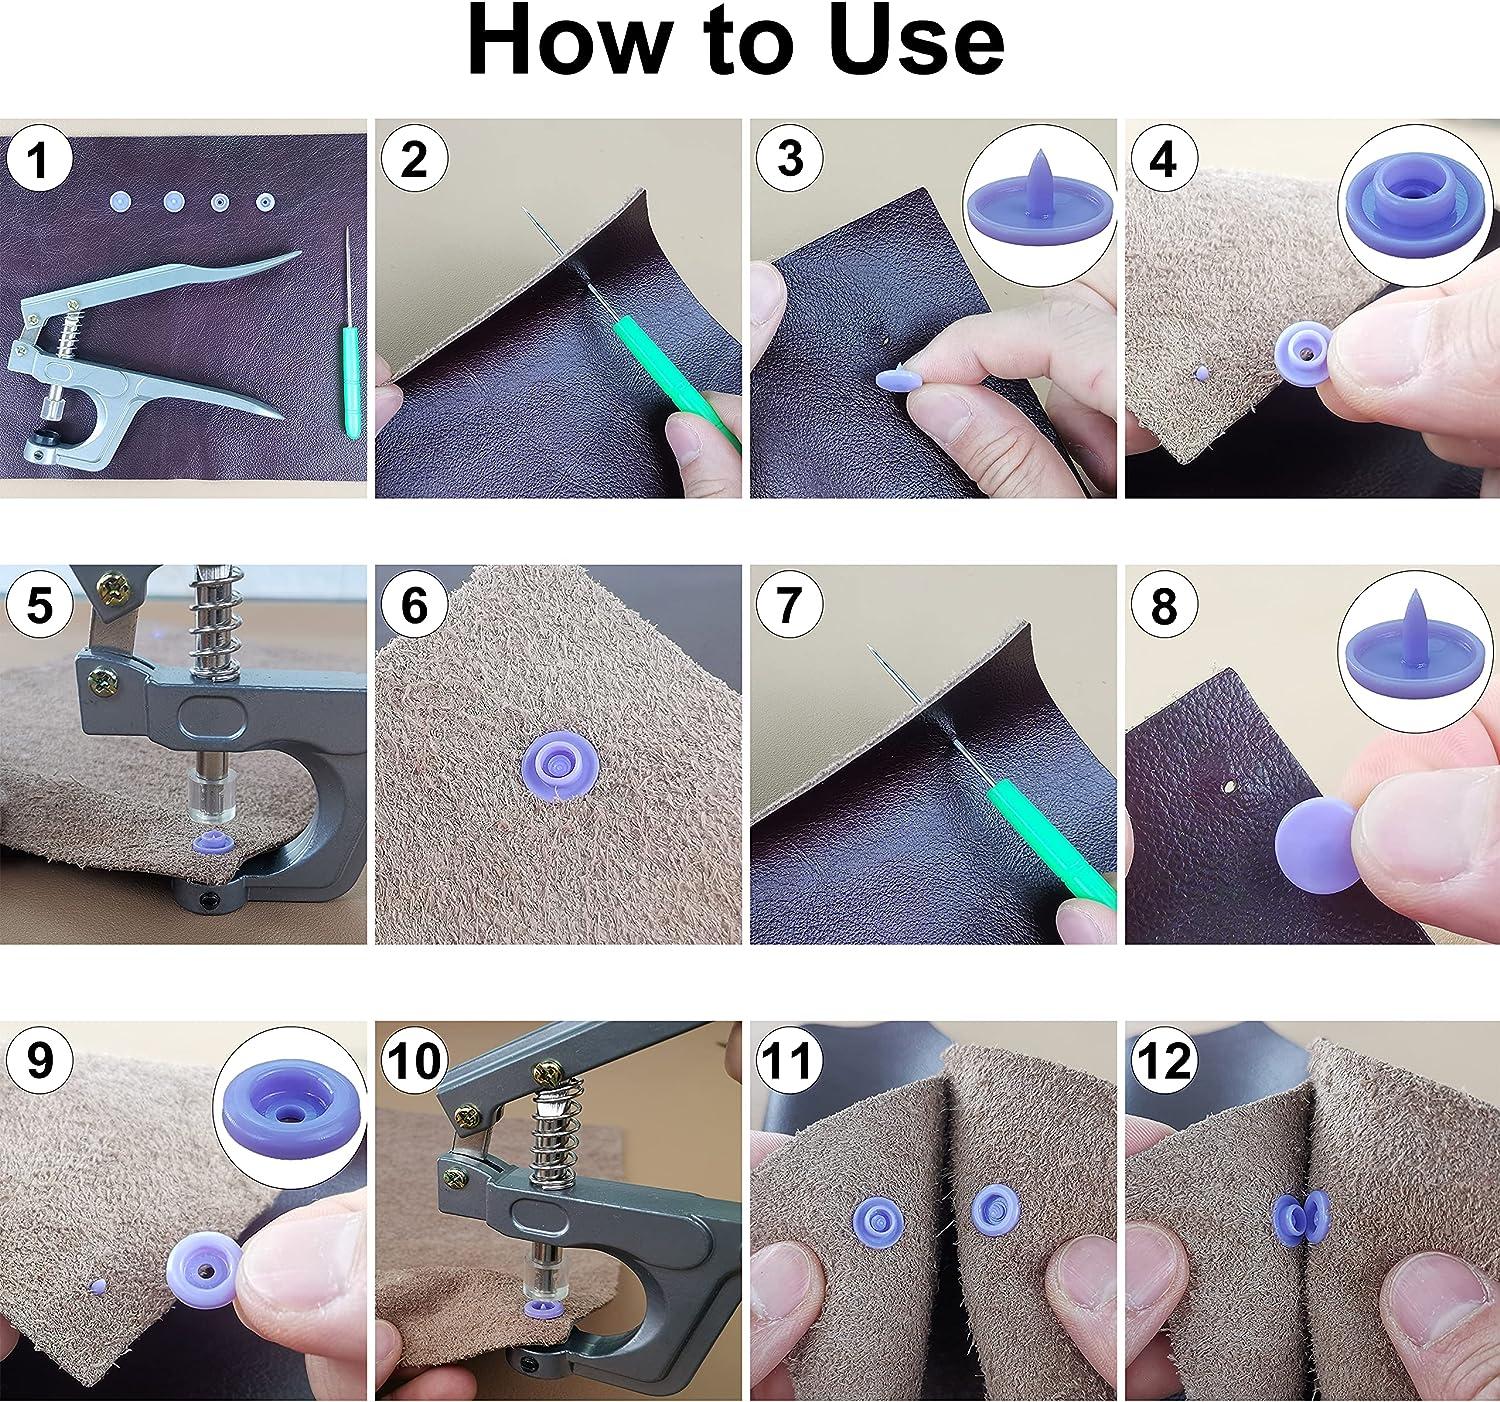 How to Install Snaps – Maker's Fabric